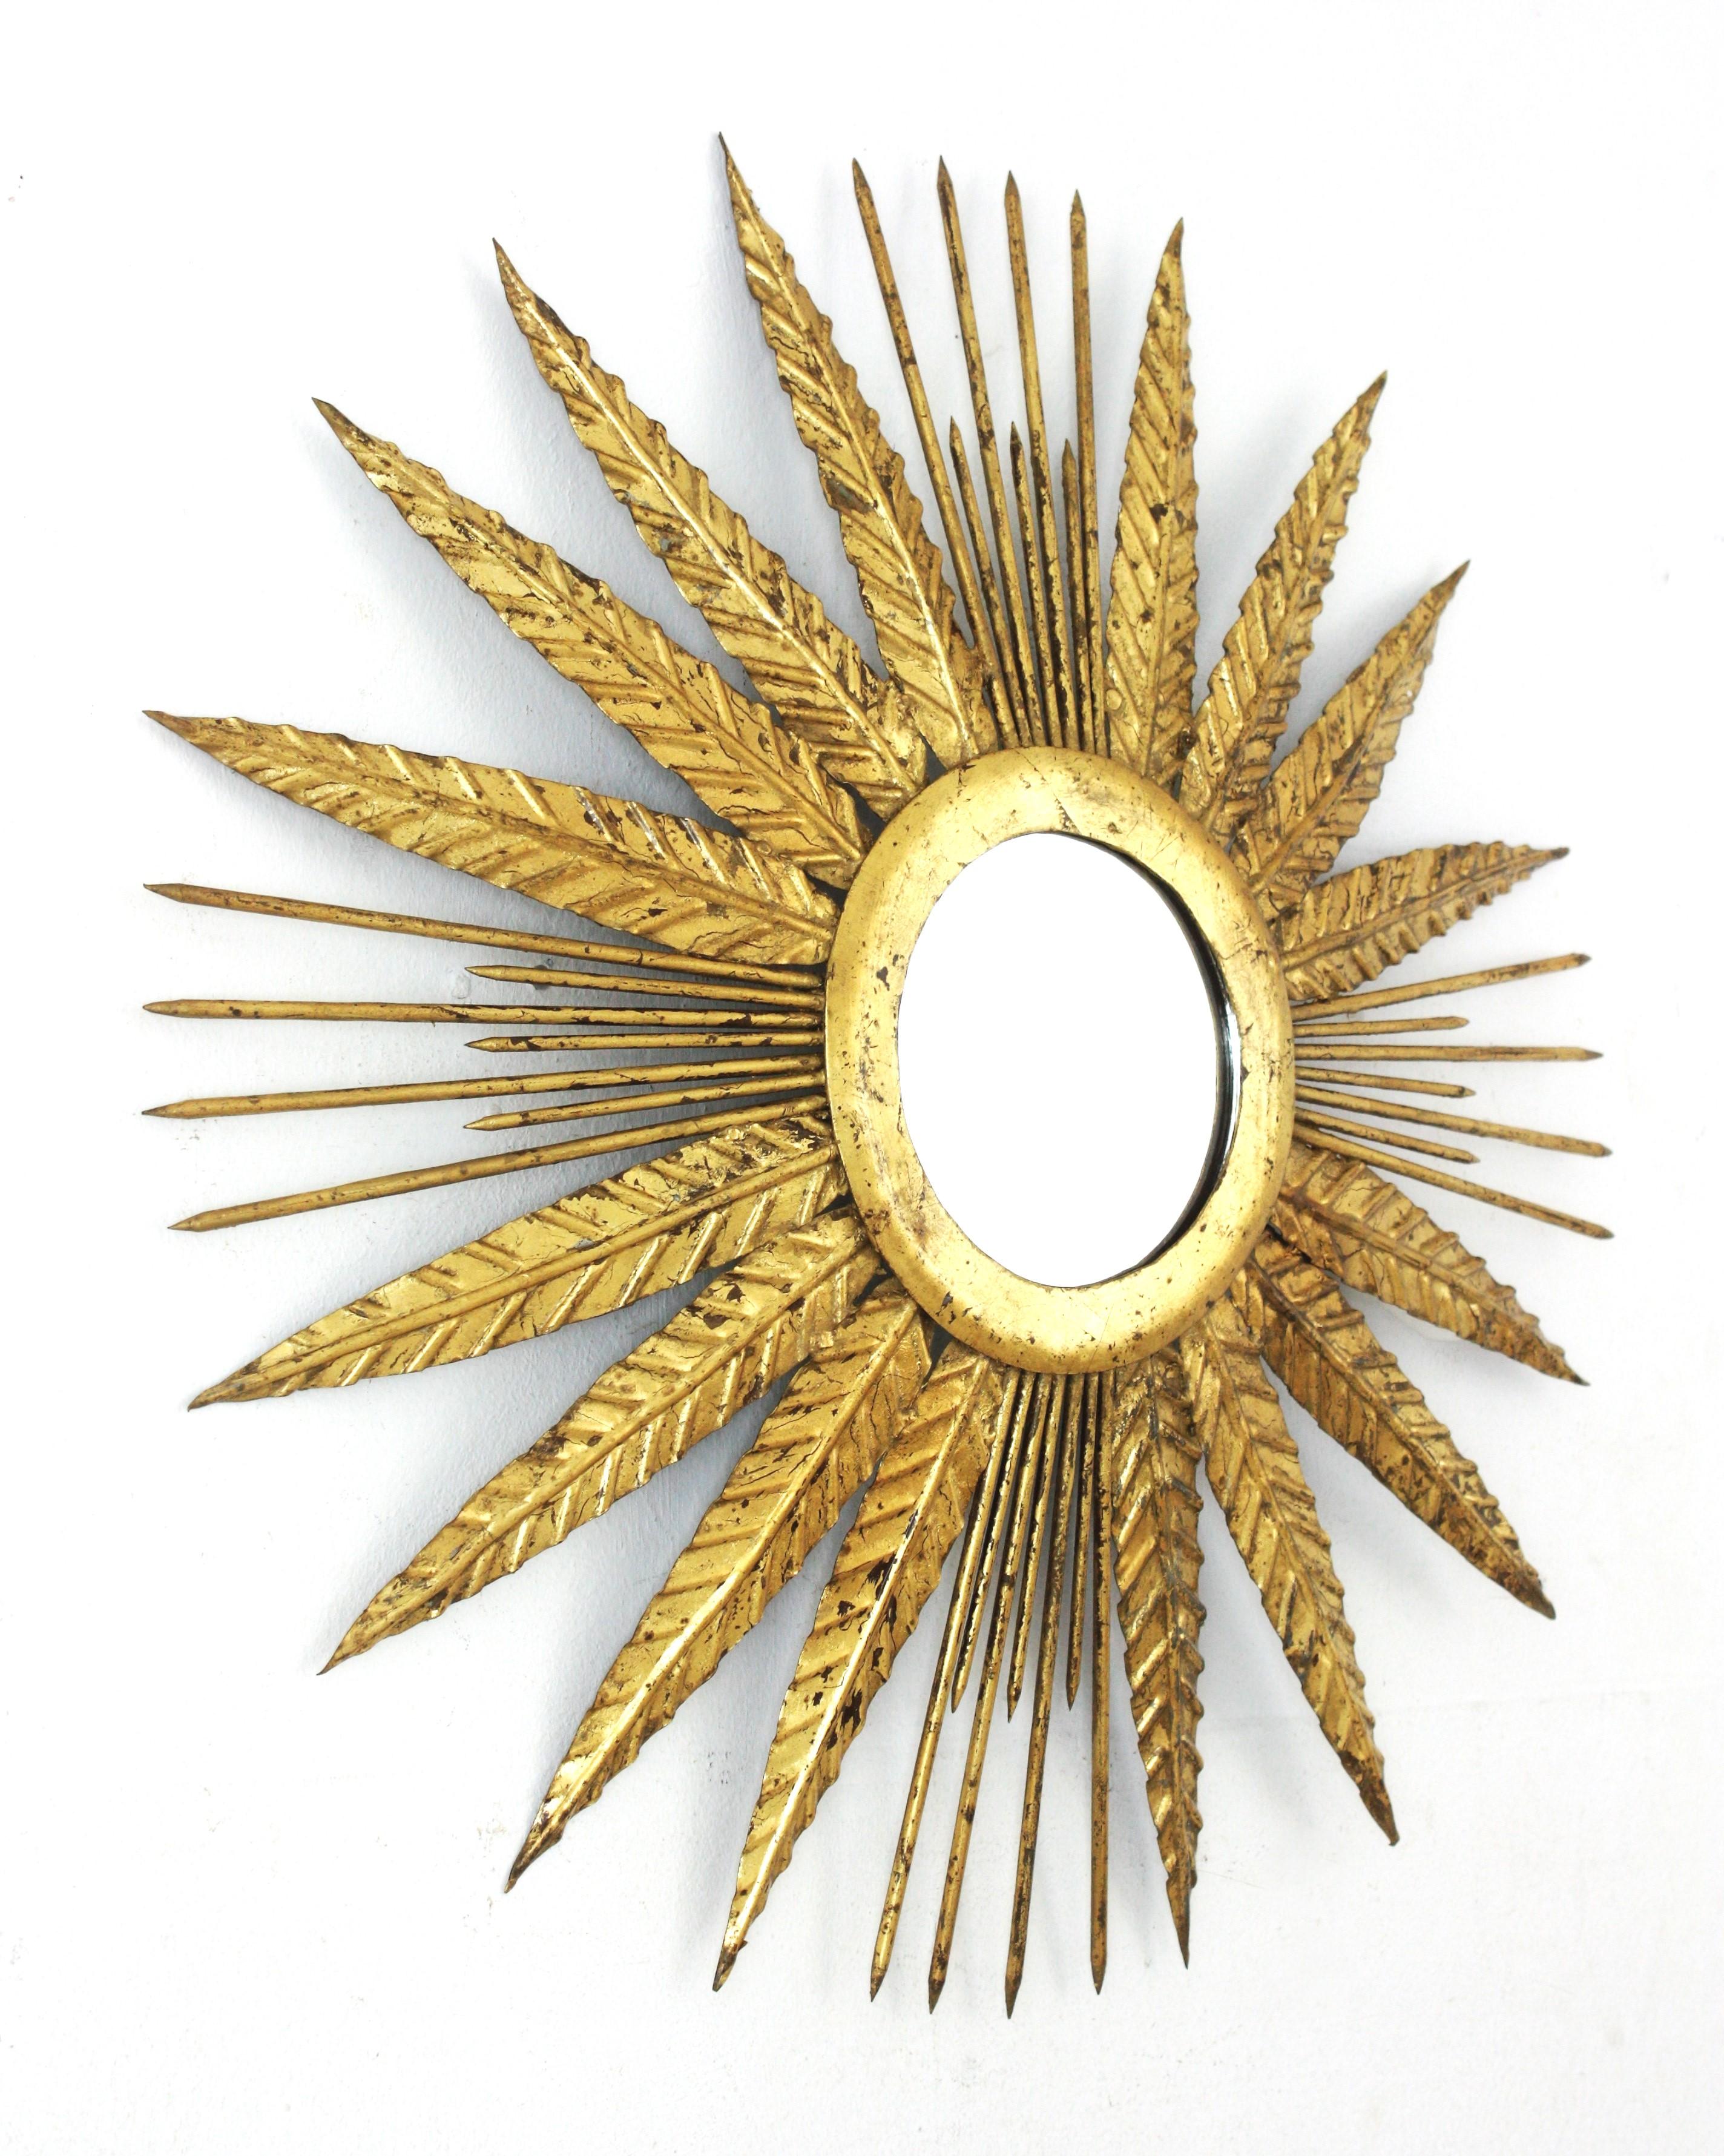 Mid-Century Modern French Sunburst Mirror in Gilt Iron with Spikey Leafed Frame, 1940s For Sale